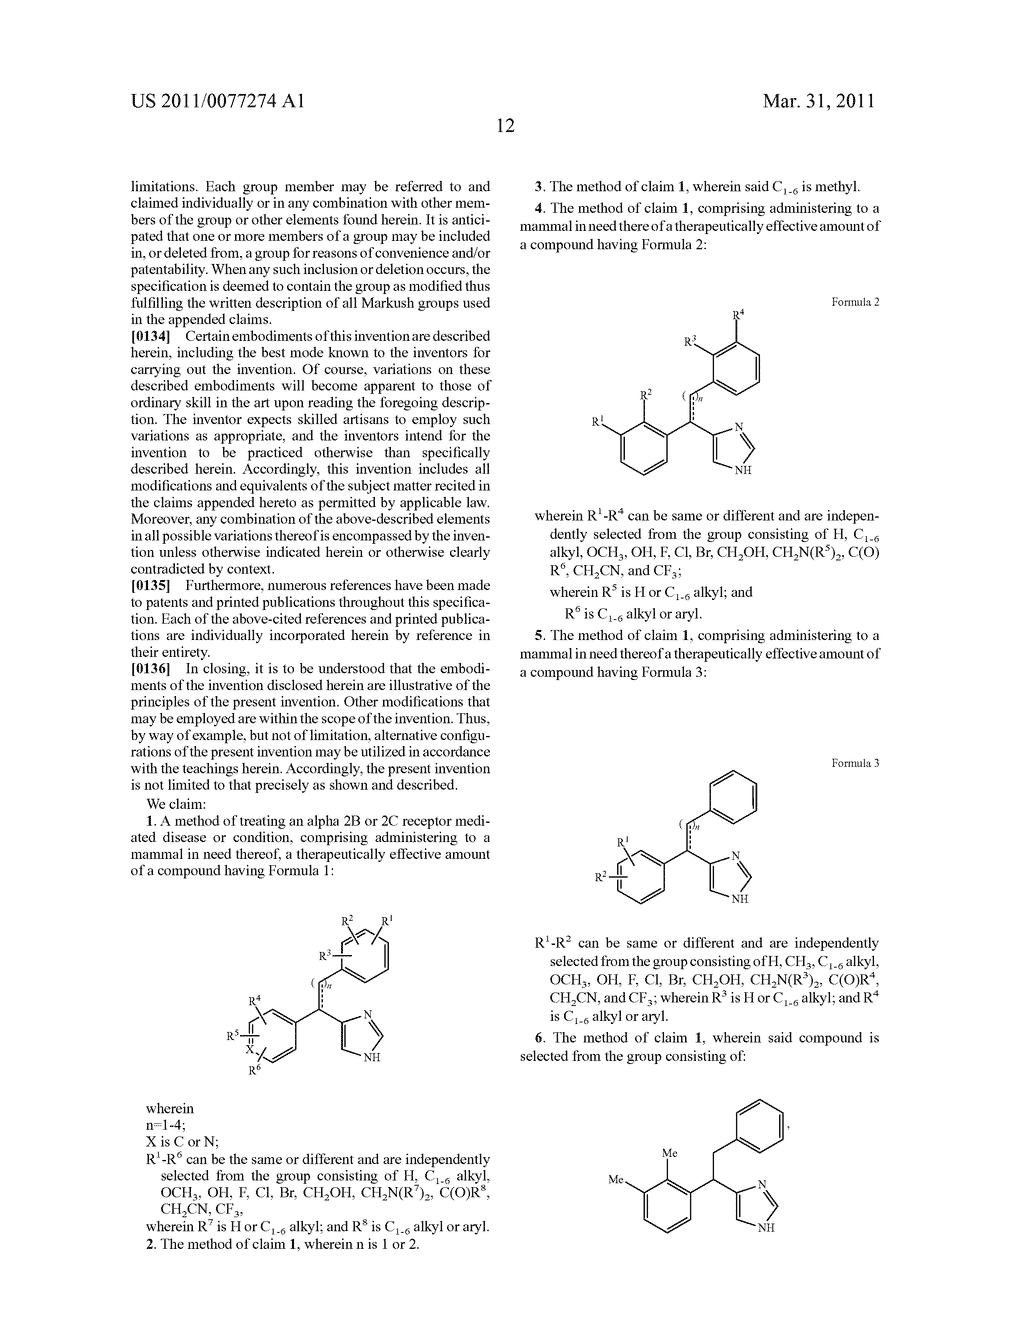 SUBSTITUTED-ARYL-2-PHENYLETHYL-1H-IMIDAZOLE COMPOUNDS AS SUBTYPE SELECTIVE MODULATORS OF ALPHA 2B AND/OR ALPHA 2C ADRENERGIC RECEPTORS - diagram, schematic, and image 13